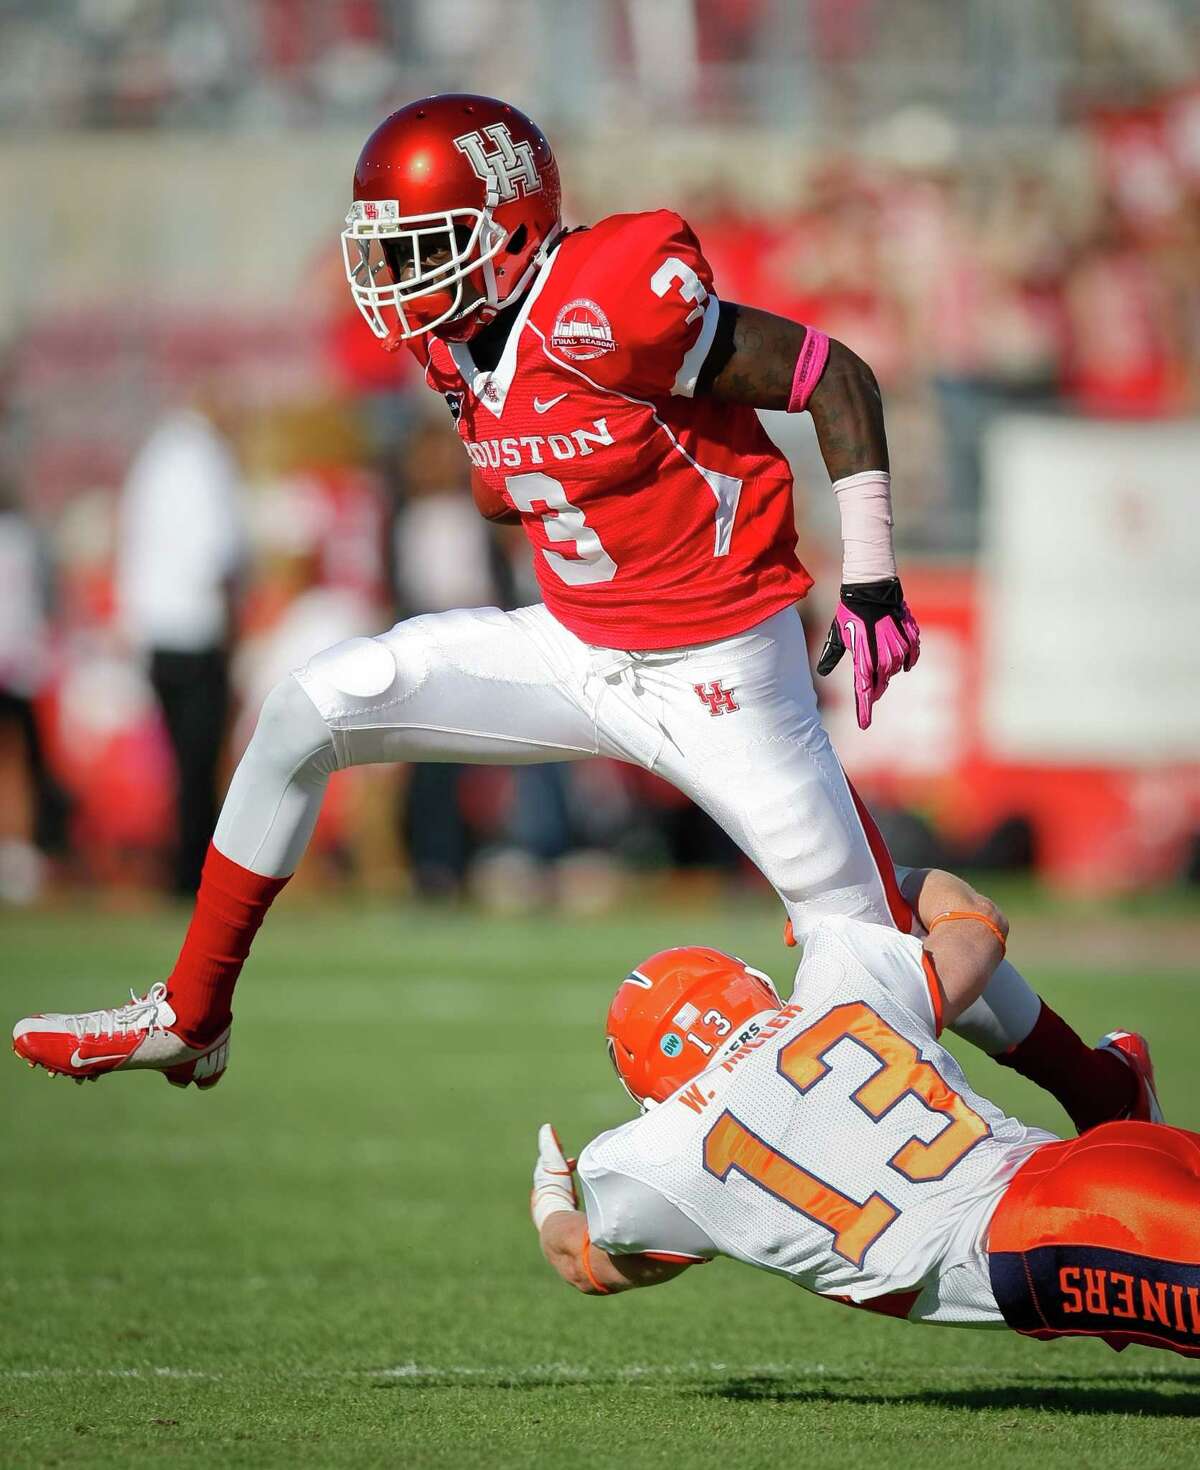 UH's Deontay Greenberry, who caught a touchdown pass from David Piland, tries to step over UTEP defensive back Wesley Miller.